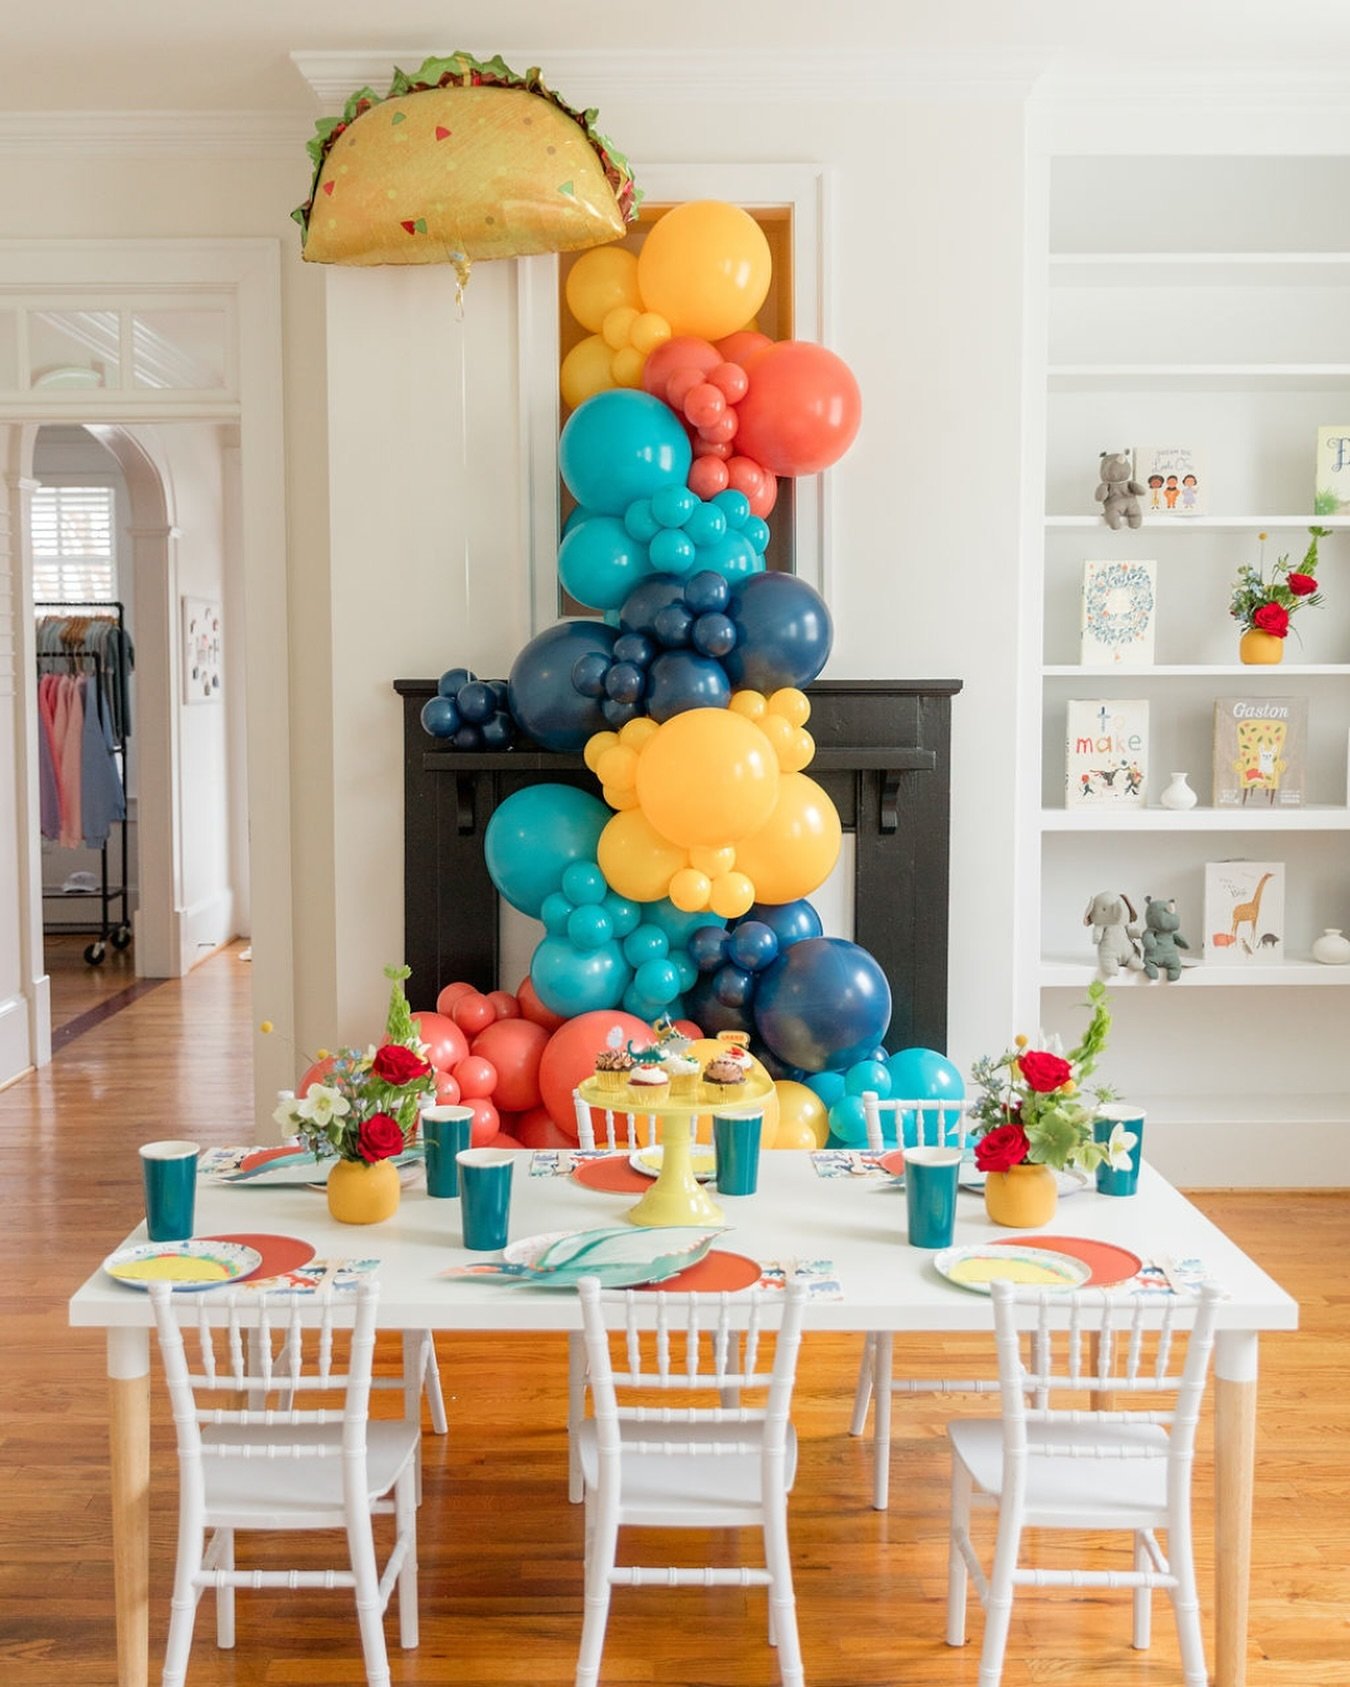 Taco &lsquo;bout a party! 🌮🐉

We spiced up this balloon garland with a vibrant color palette + a jumbo taco balloon to top it off and we love the way it tied everything together!

P.S. In case you ever wondered, yes, dragons do love tacos (at least